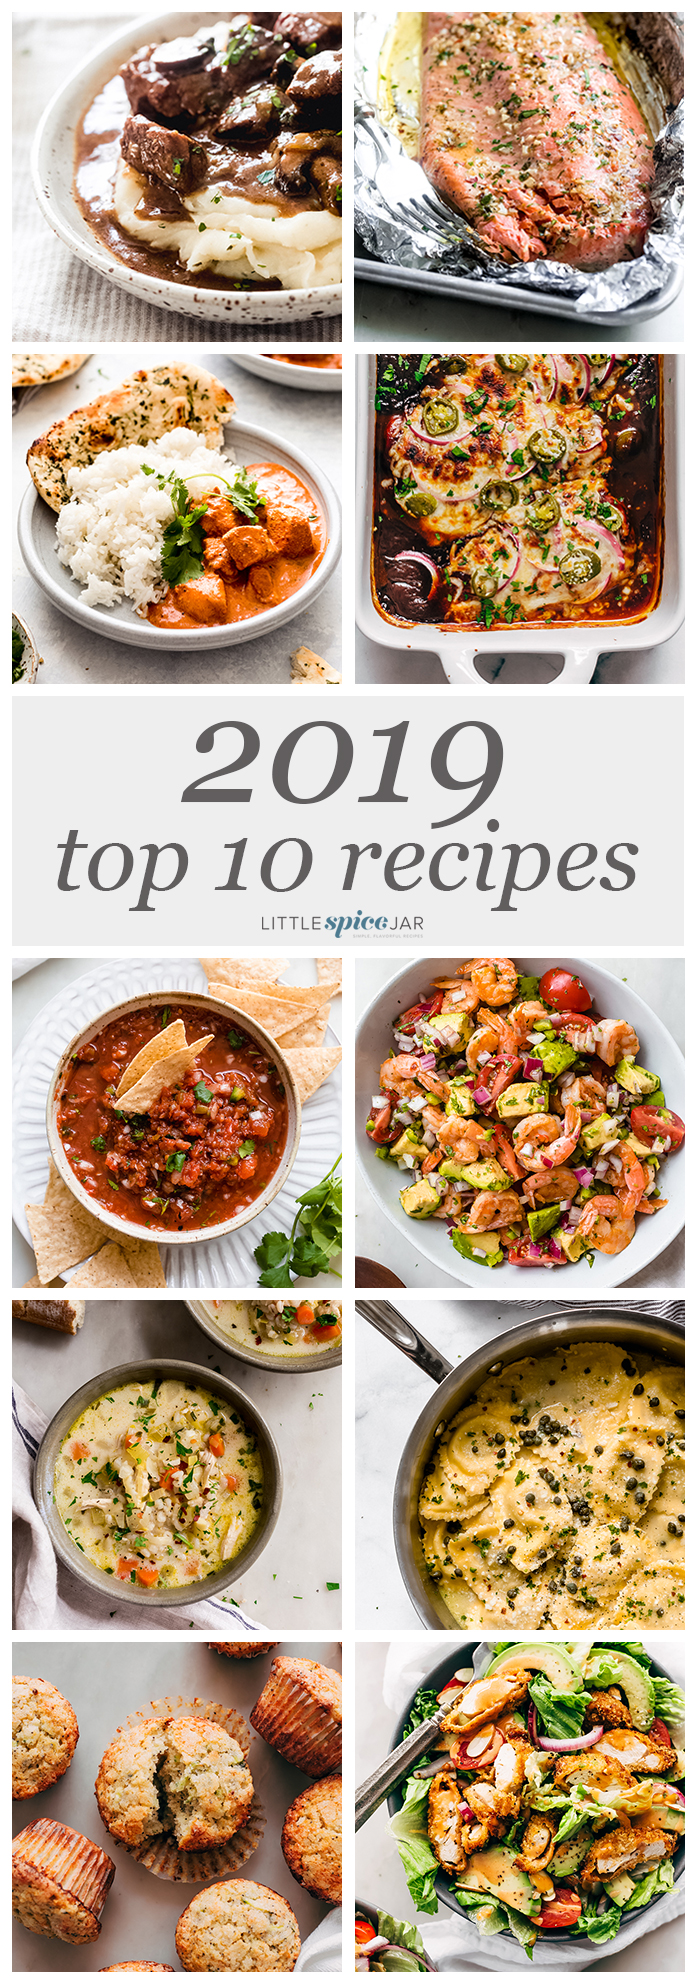 2019 TOP 10 RECIPES OF THE YEAR: Check out the top 10 recipes on Little Spice Jar #top10recipes #recipes #bestrecipes | Littlespicejar.com